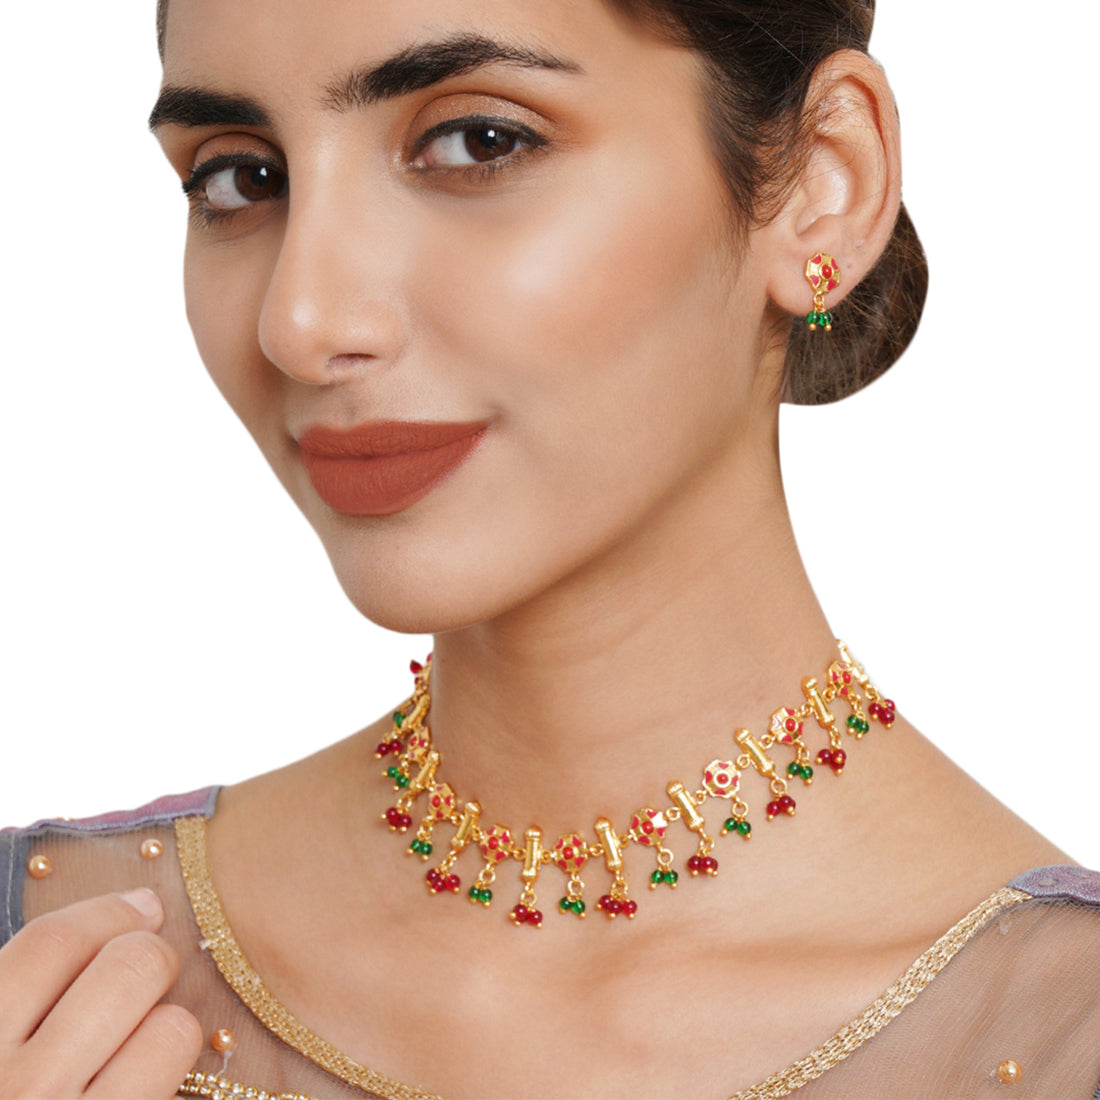 Women's Enamelled And Gold-Plated Festive Hues Red Festive Necklace Set - Voylla